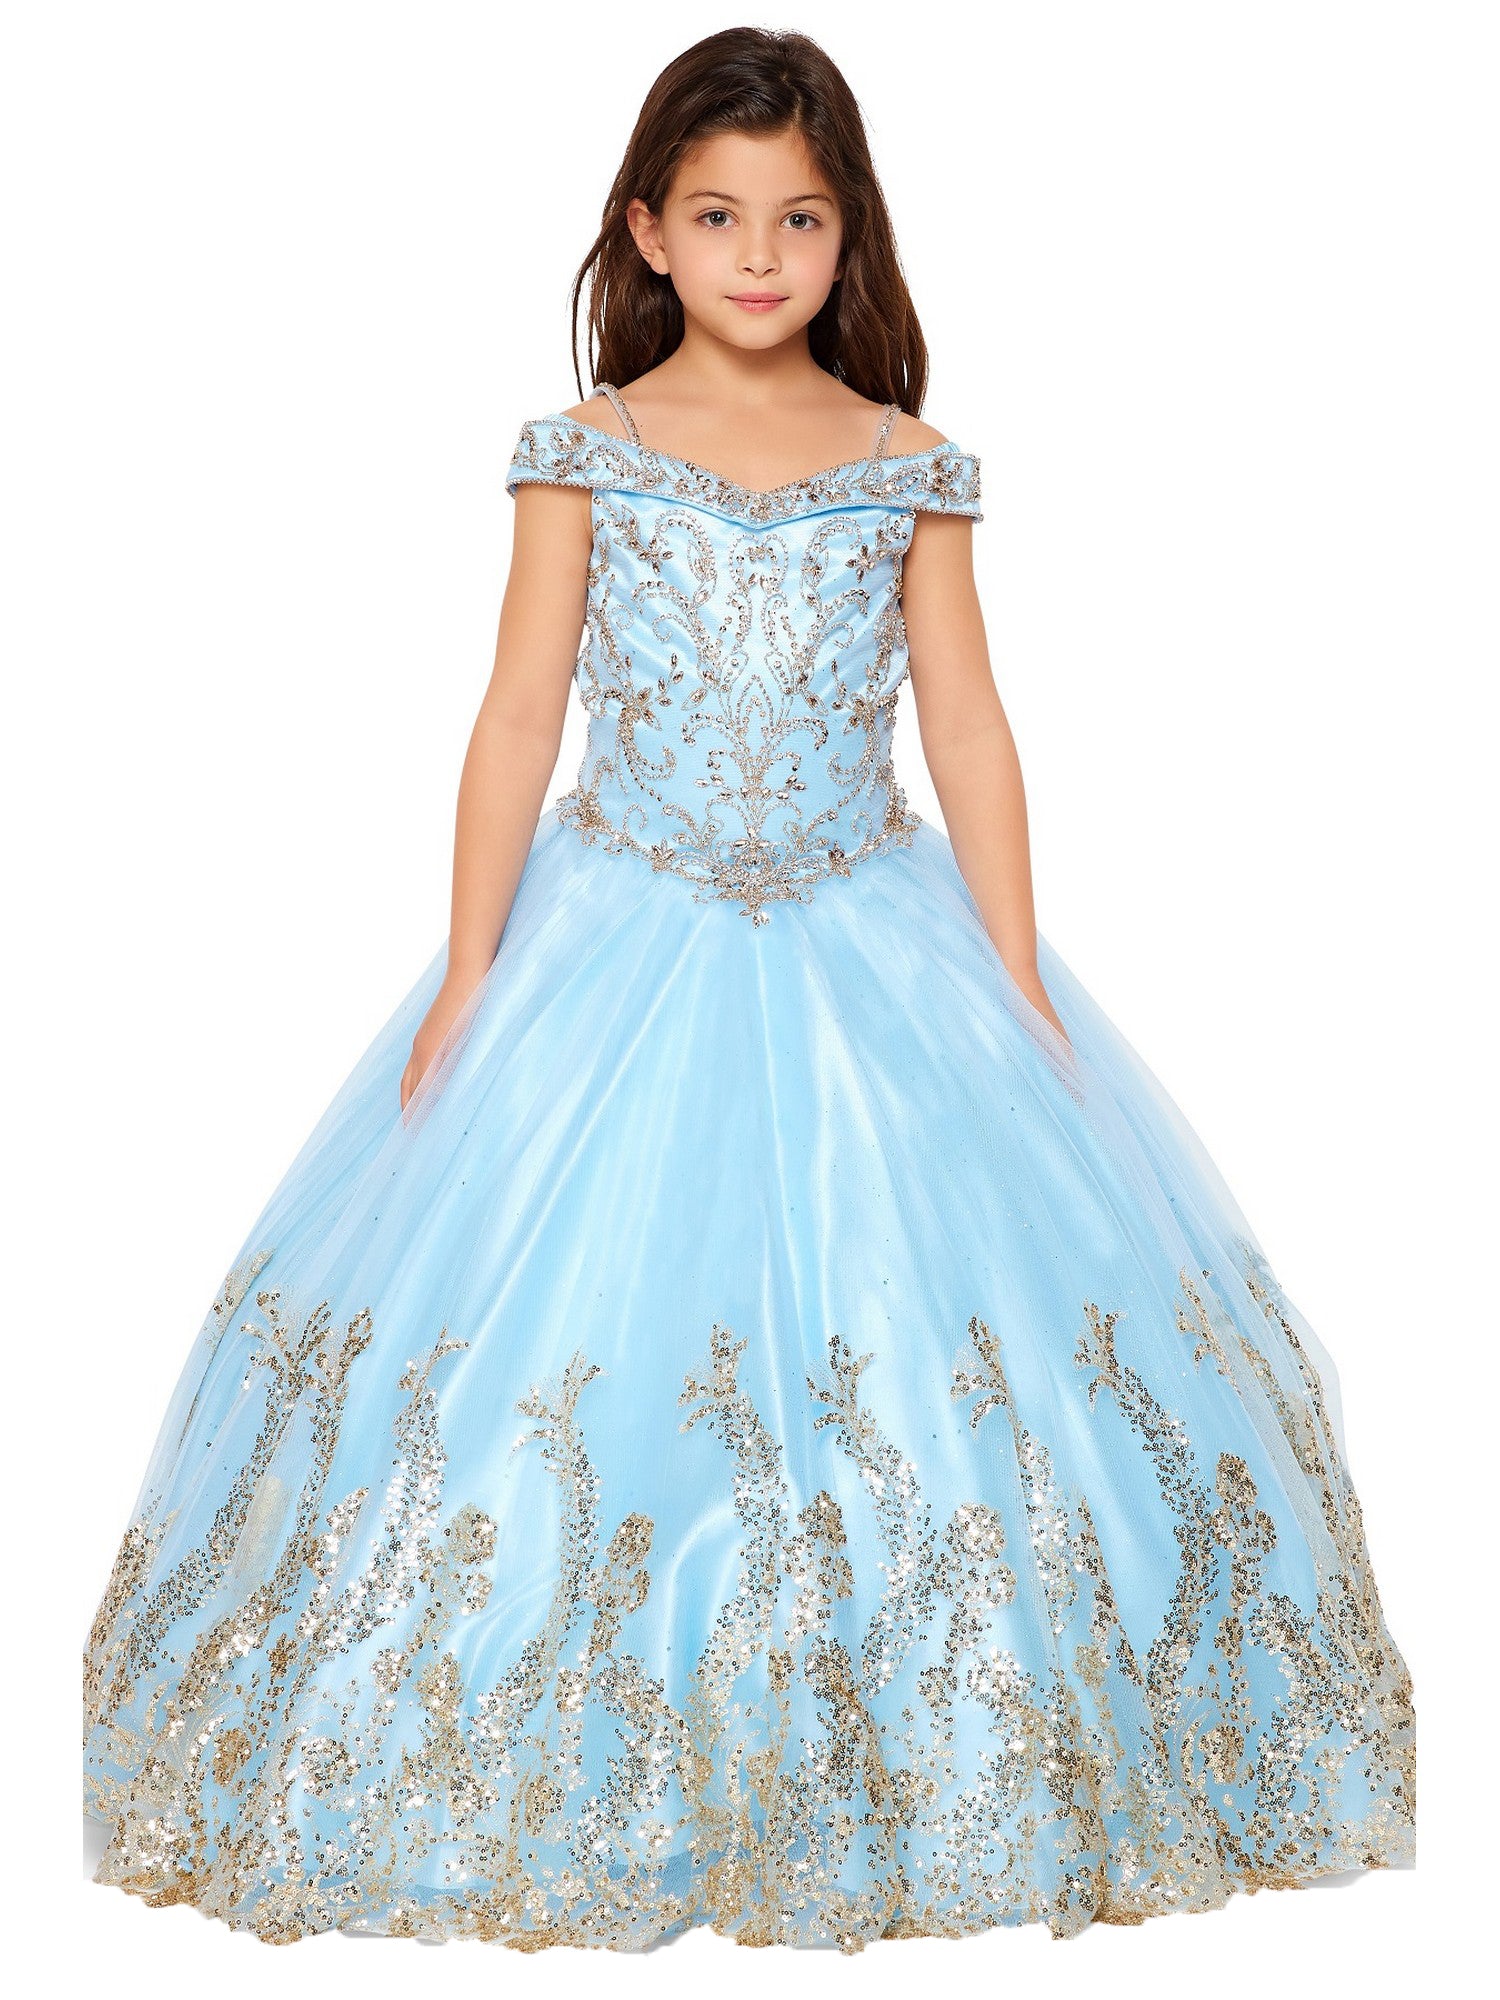 Sky Blue Beaded Halter Pageant Dress Brand New Size 10 for Kids Girl -   Canada